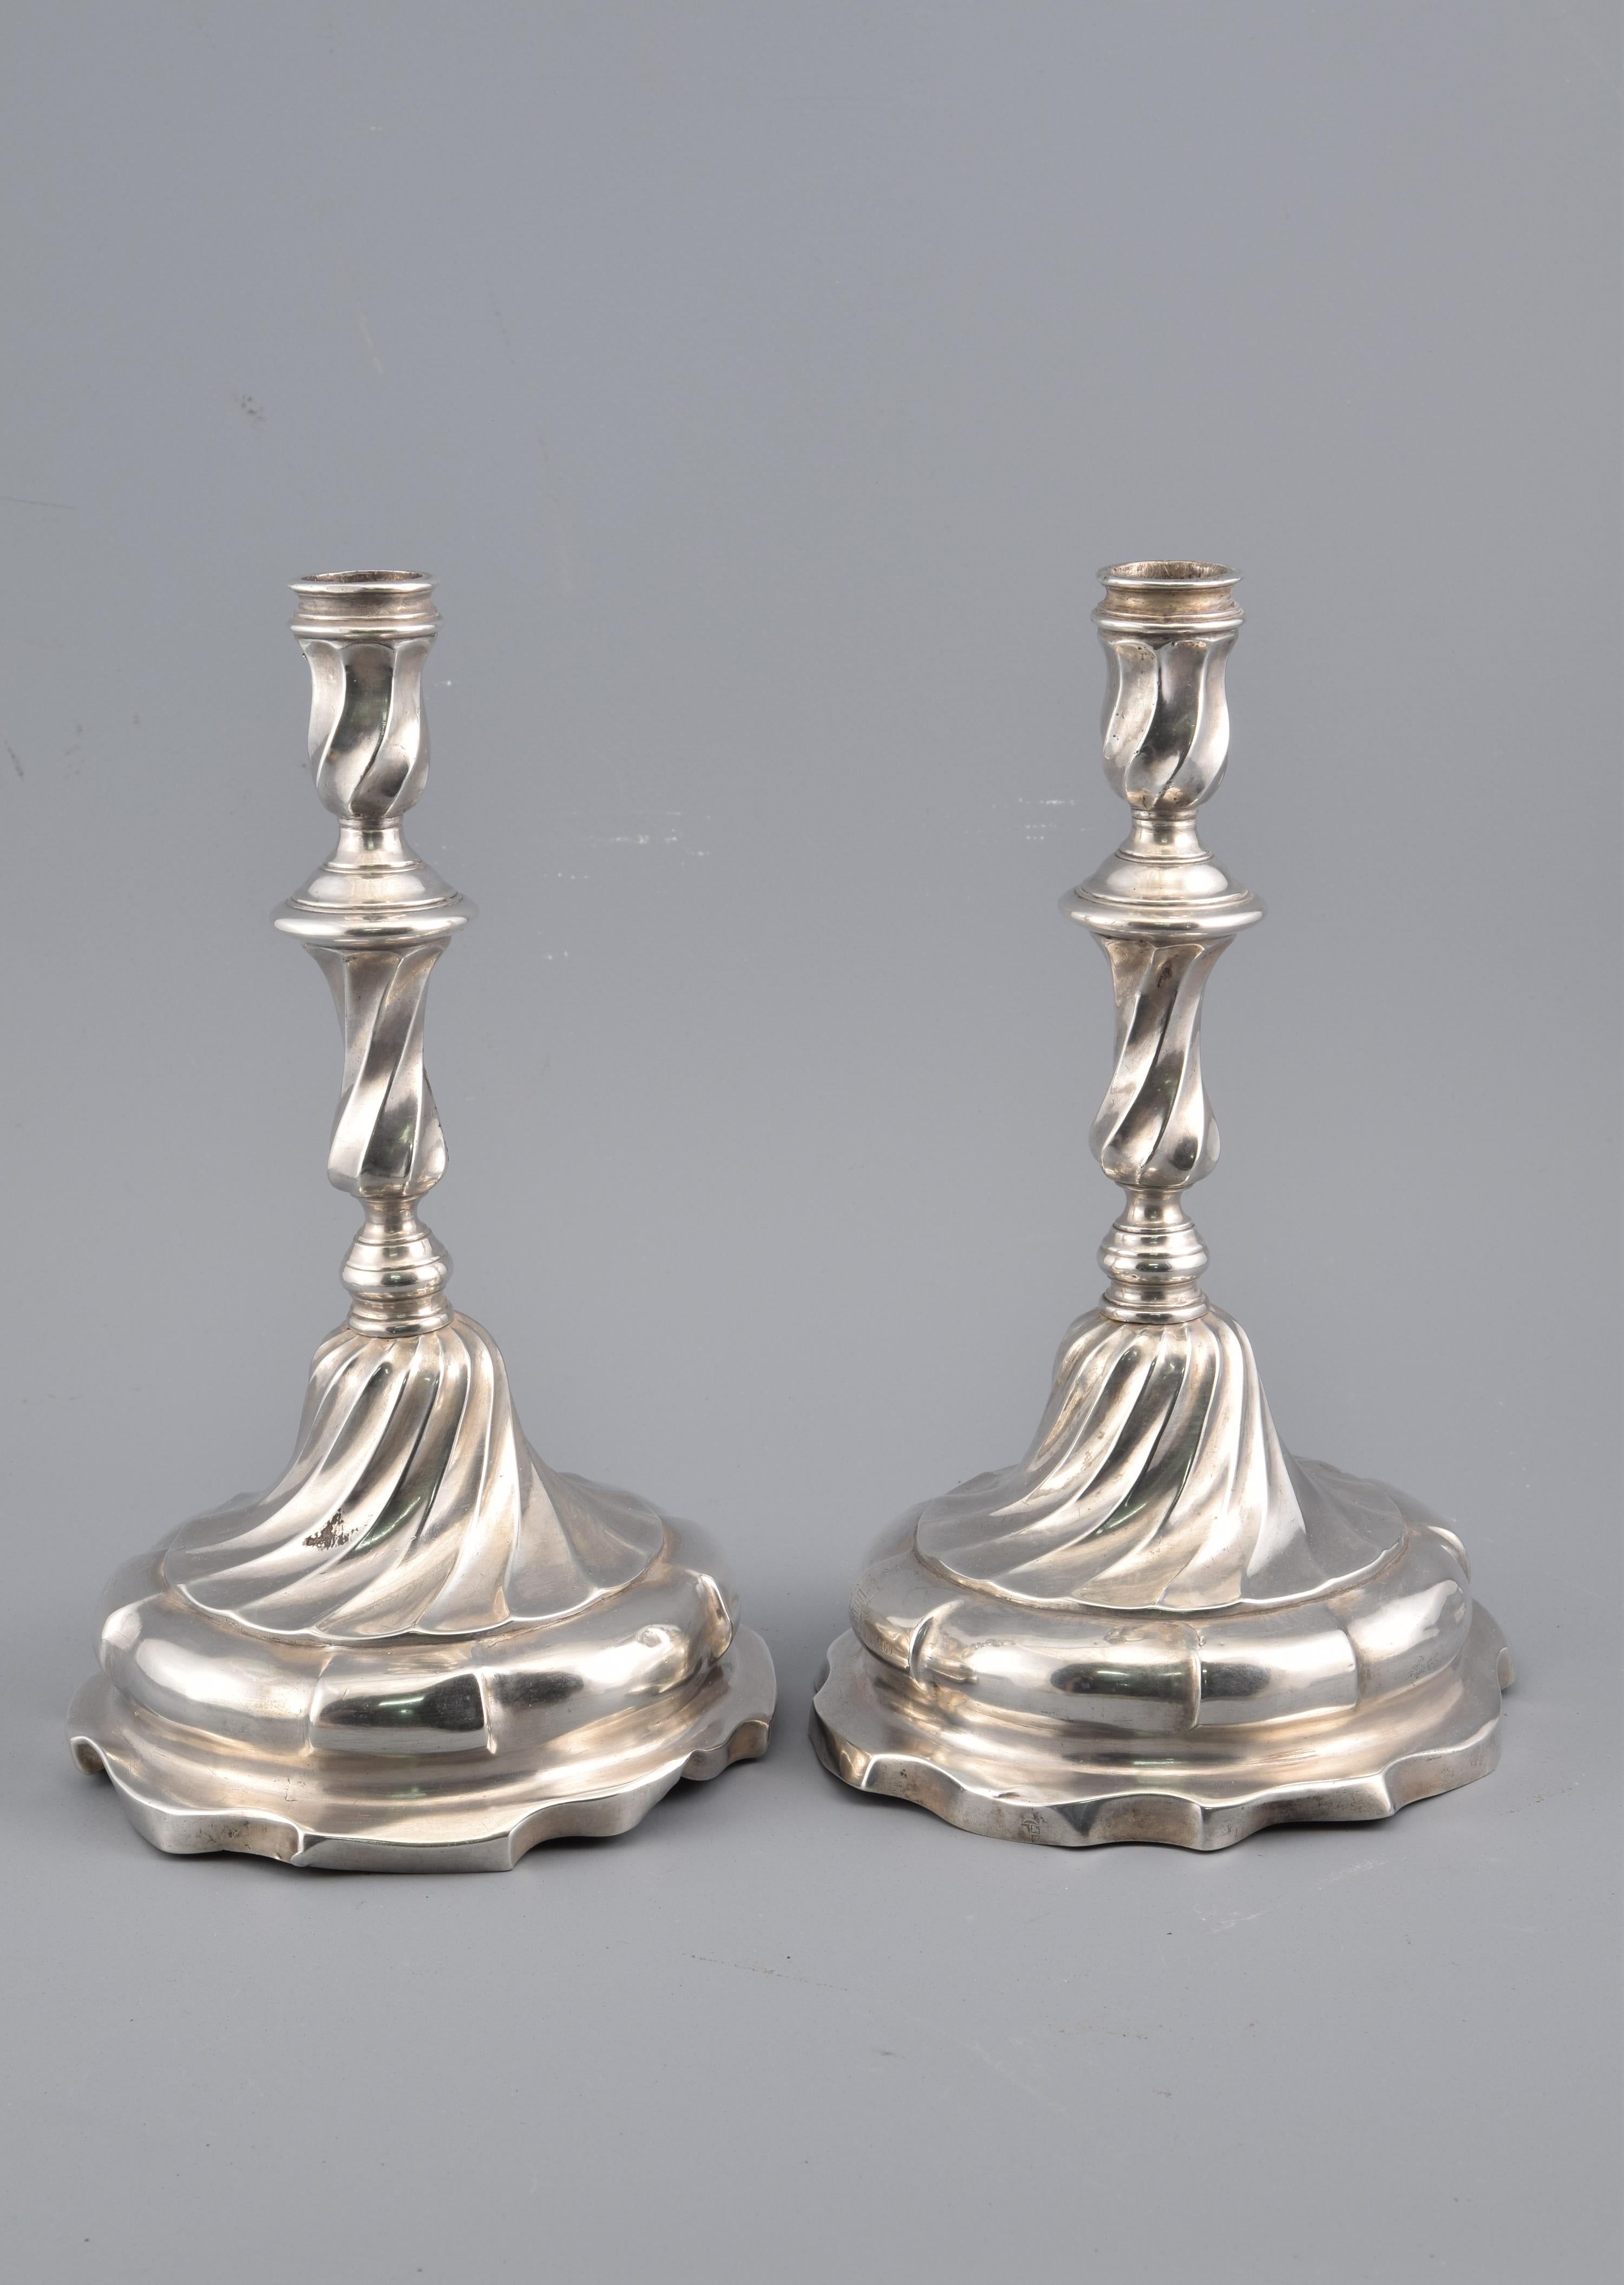 Late 18th Century Pair of Silver Candlesticks or Candleholders, Possibly González Téllez, Antonio